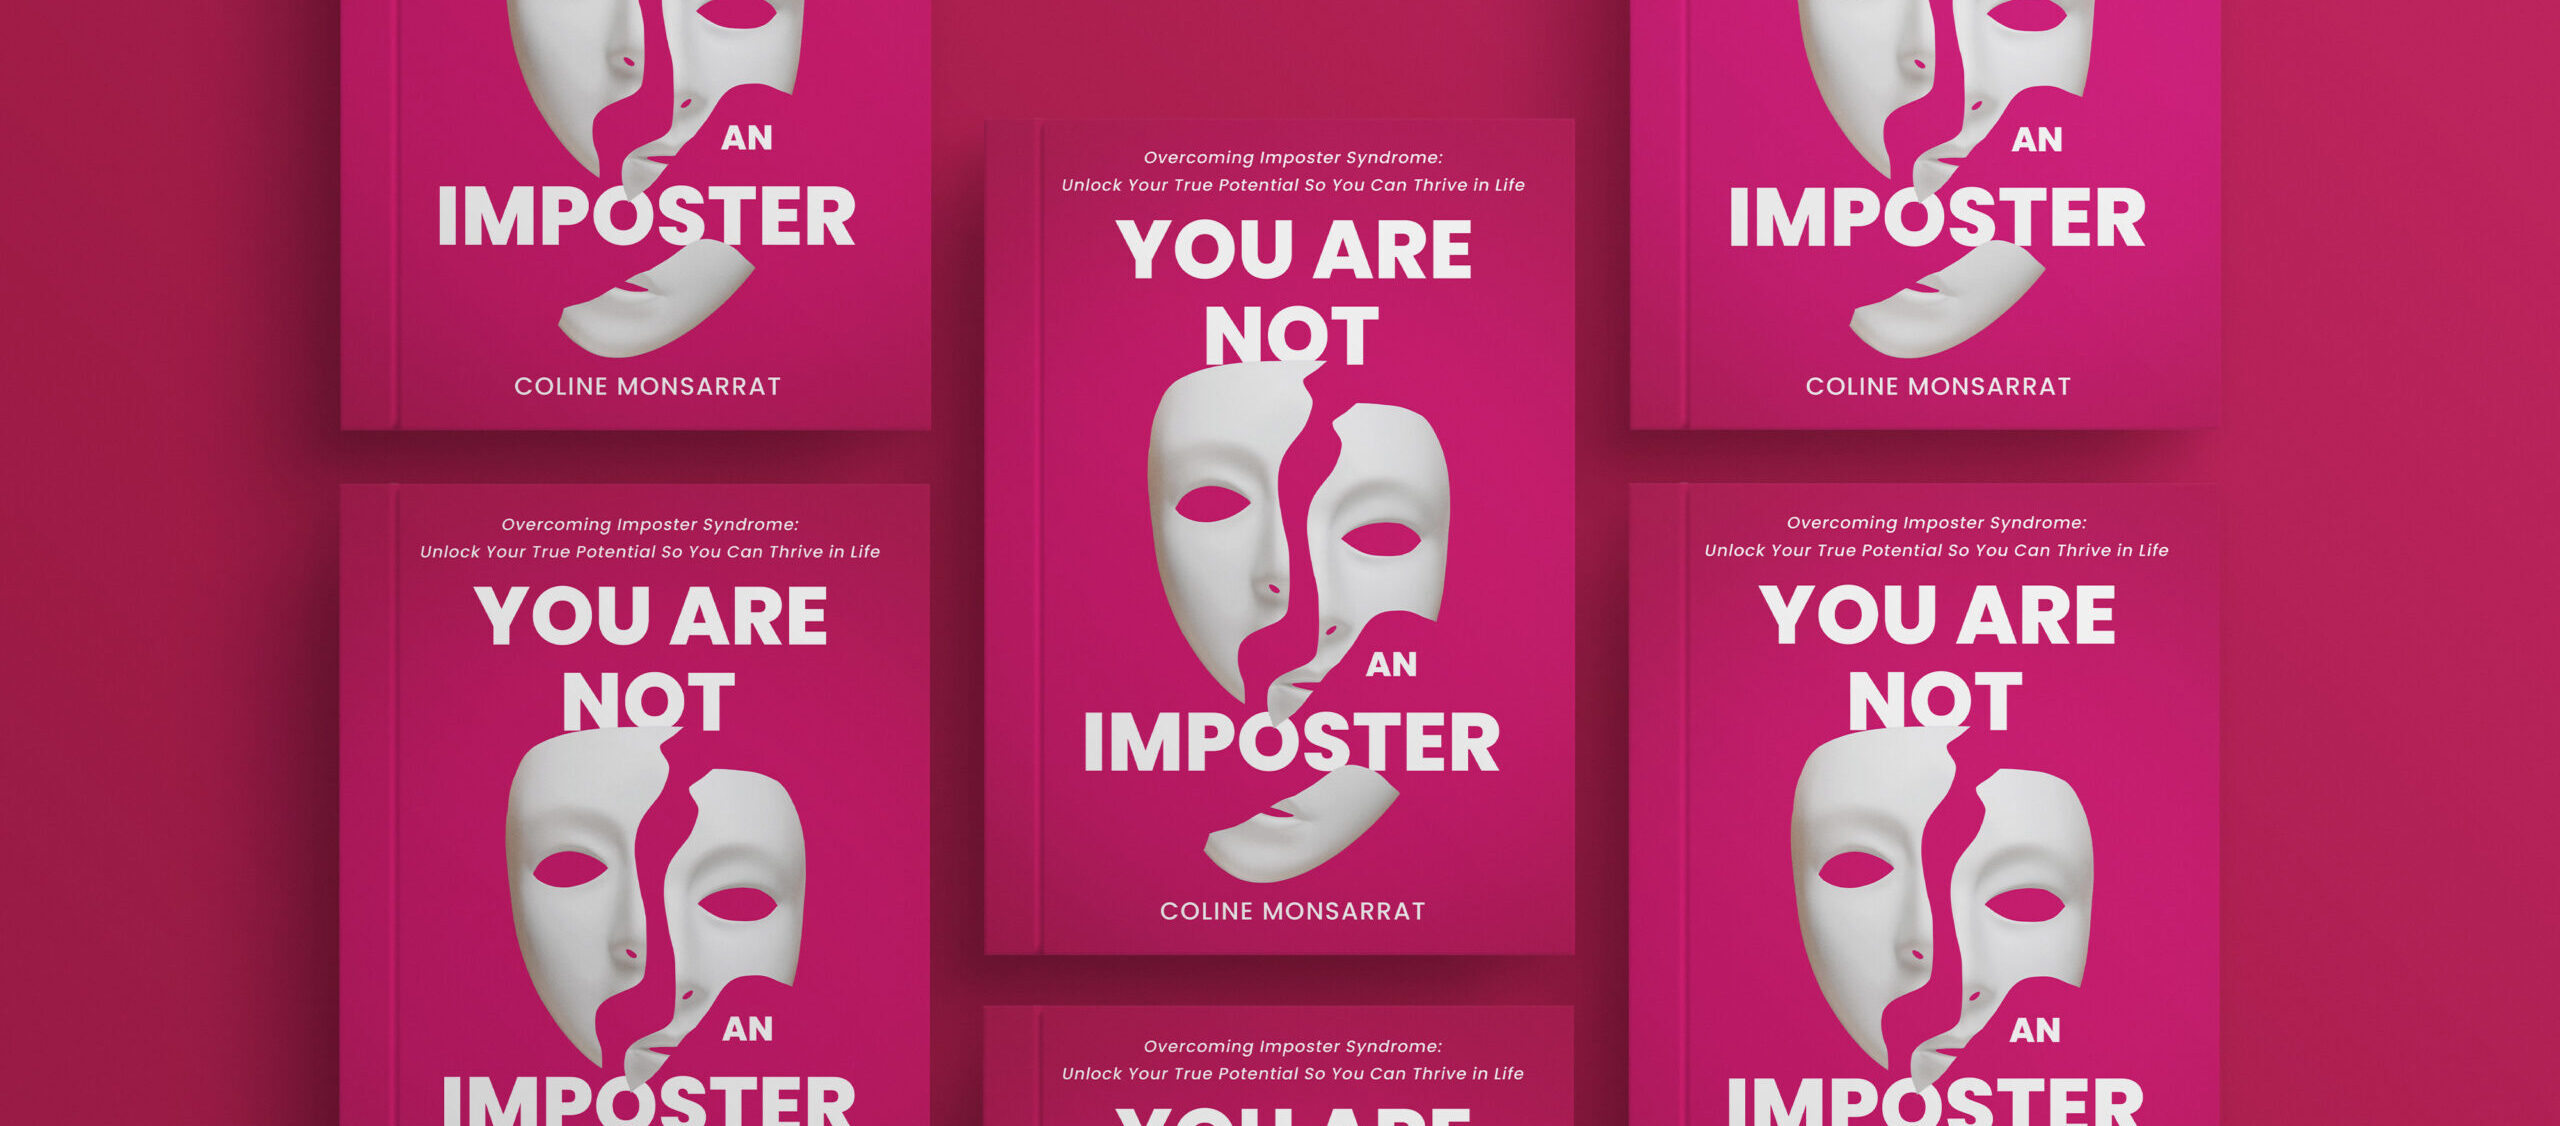 Self-help and memoir book "You are not an imposter"